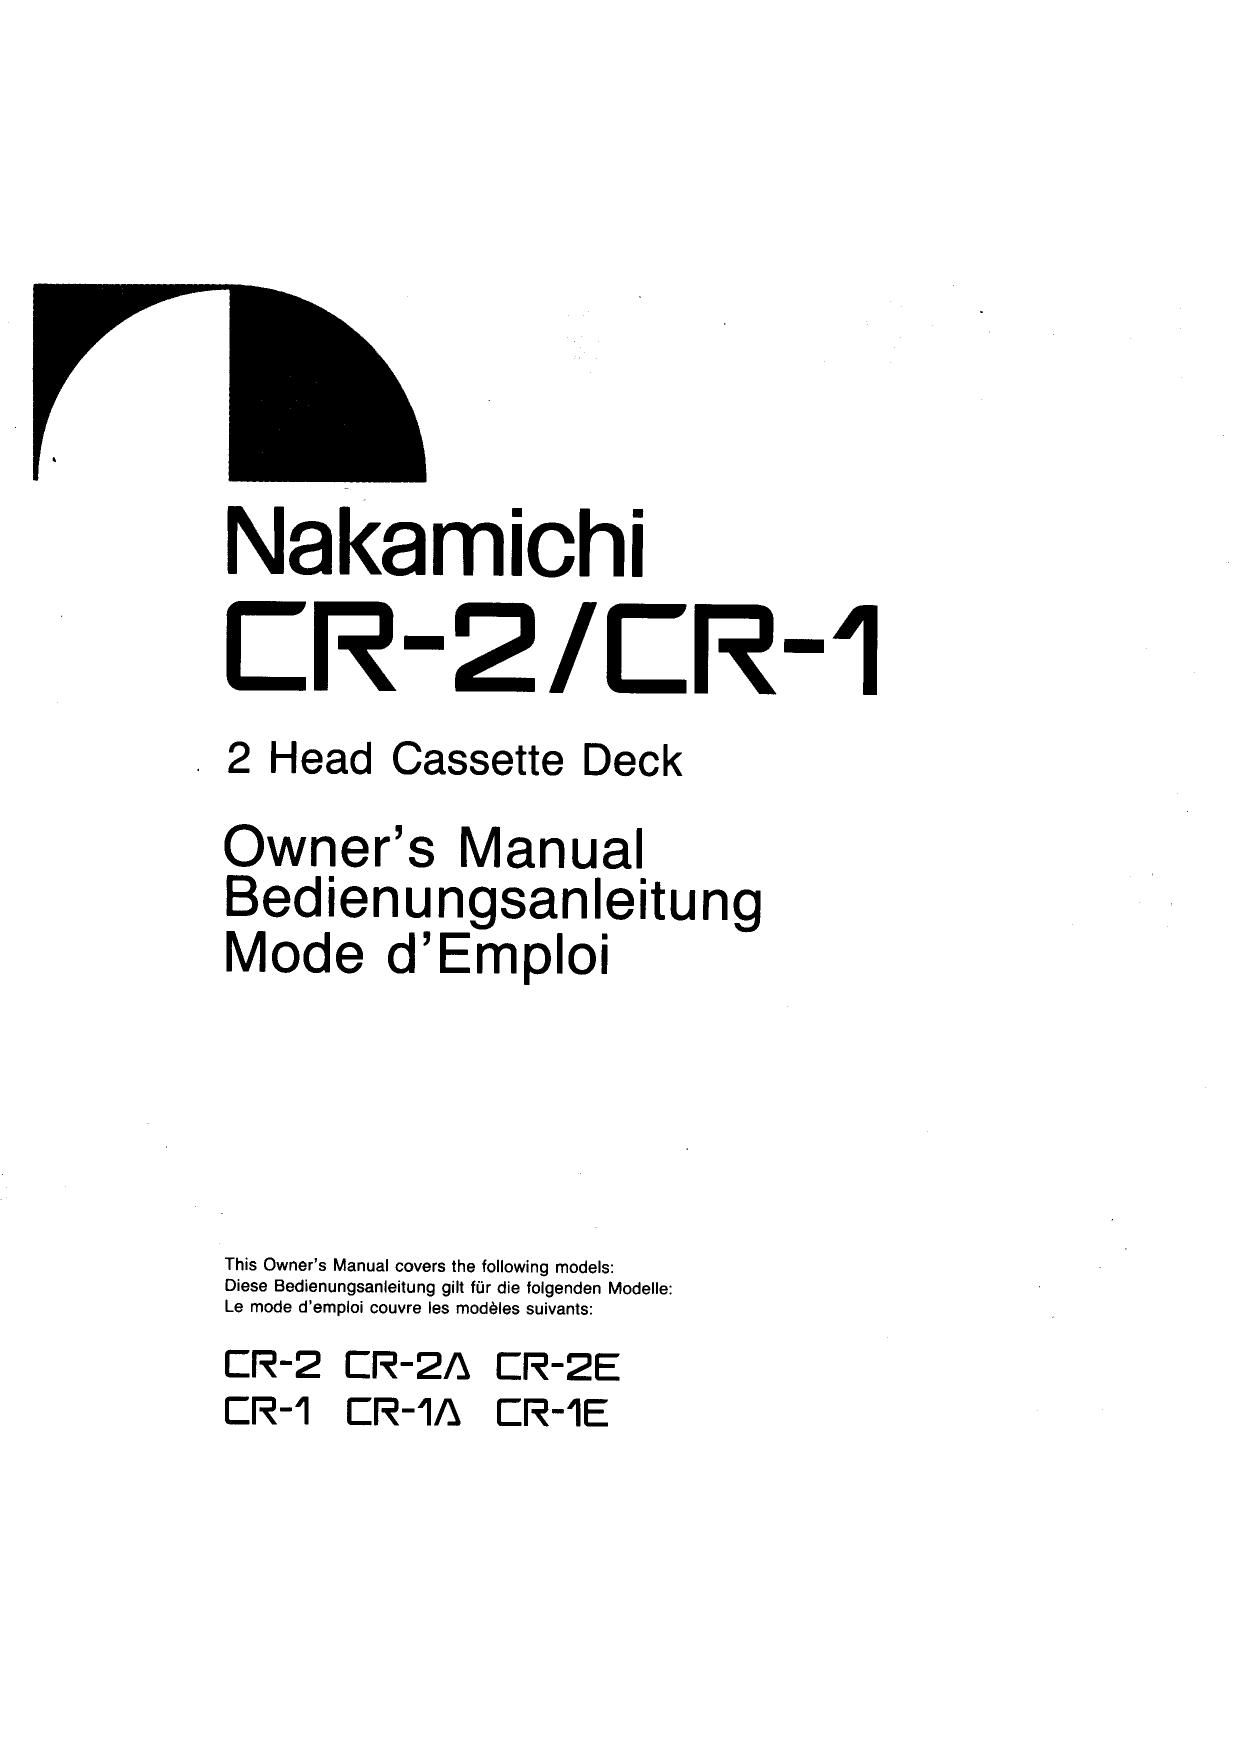 Nakamichi CR 1 A Owners Manual